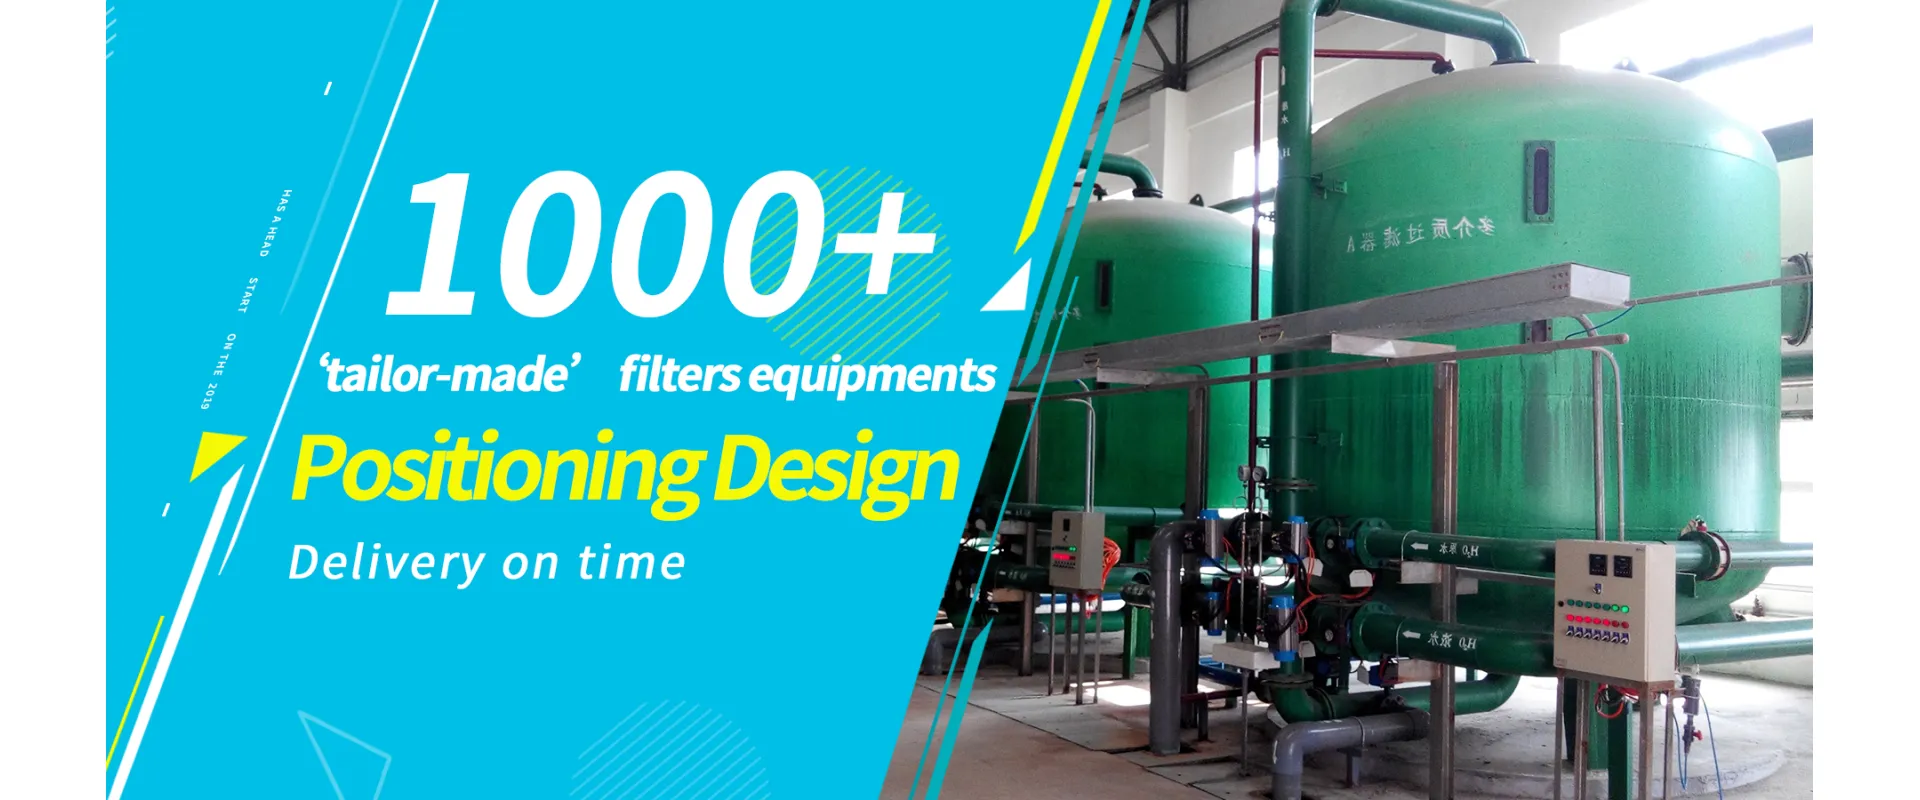 Self-Cleaning Filters for industry filtration